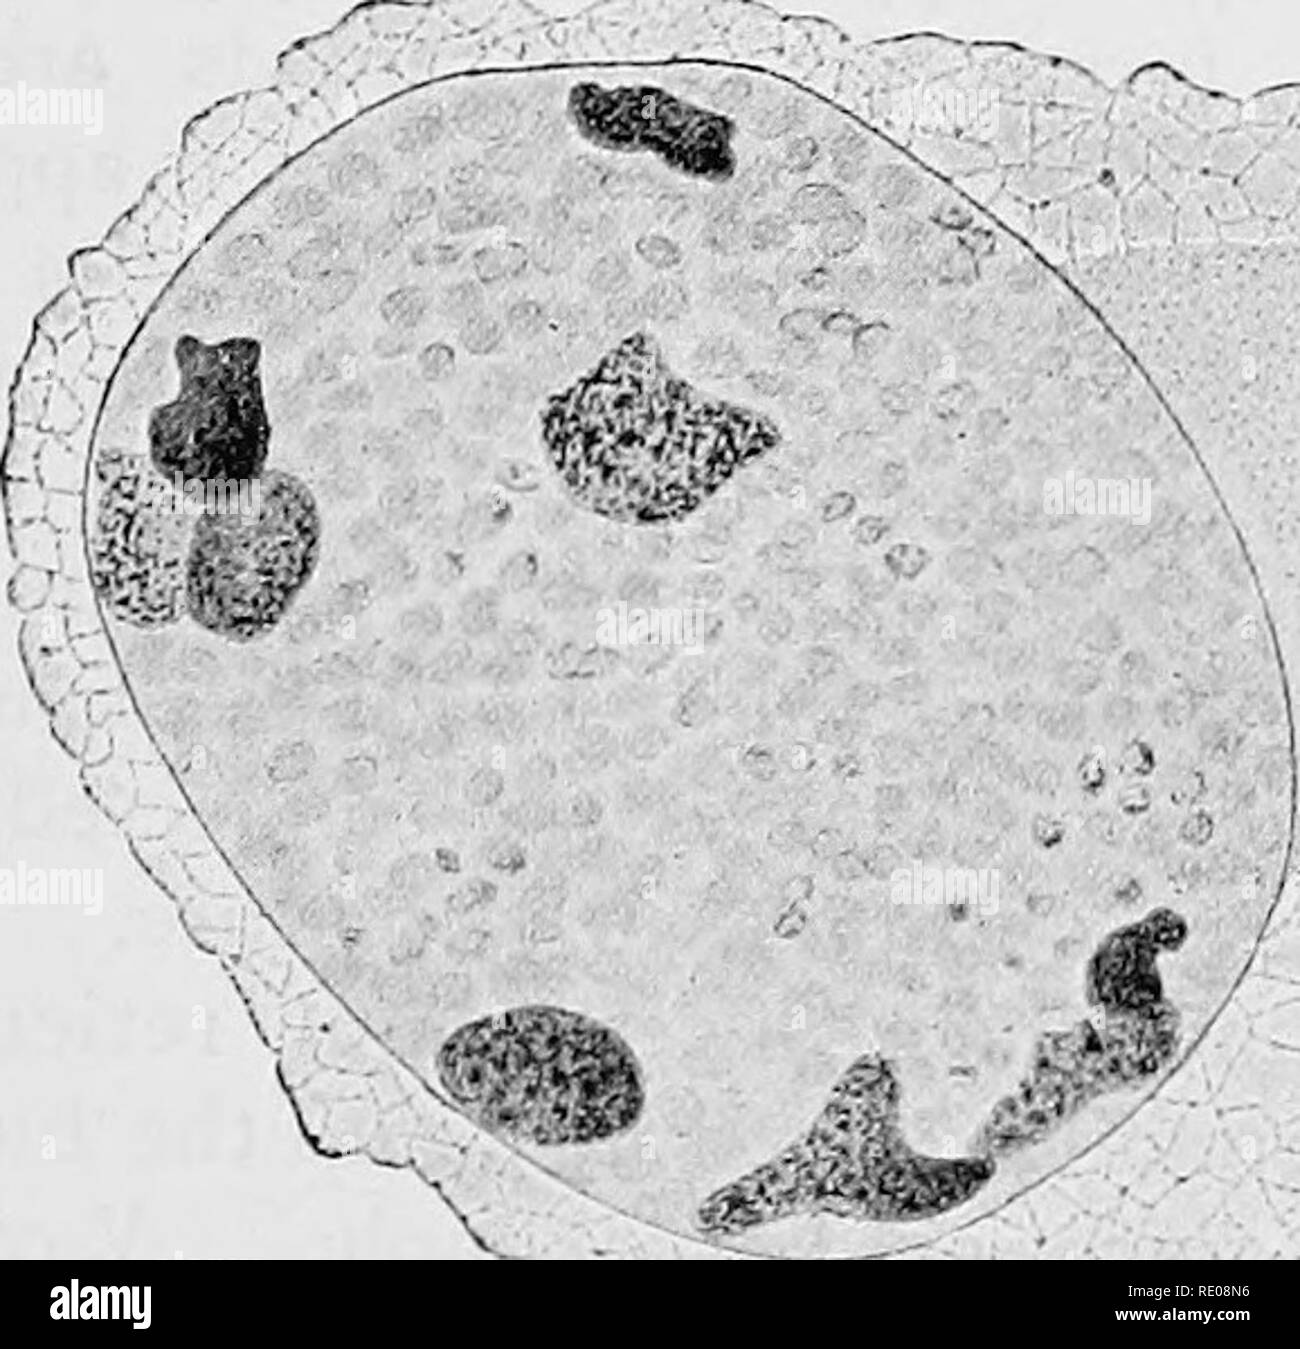 . The Protozoa. Protozoa. ^KL E Fig. 134. — Types of nuclei. [A. Calcituba polymorpha Roboz, from SCHAUDINN. B. Colptdium colpoda, from a preparation. C. Euglena vlridis Ehr. irom a preparation. D. letramiius ctulomo- nas, n. sp. E. Noctiluca miliaris Sur., from a preparation.] A single karyosome (A) becomes vesicular, and ultimately gives rise to several daughter-karyo- somes (so-called &quot;fragmentation&quot; Schaudinn). Several karyosomes in Noctduca (E) hold the chromatin, the rest of the nucleus is filled with &quot;achromatic &quot; granules. In Tetramitus chilomonas (D) the chromatin Stock Photo